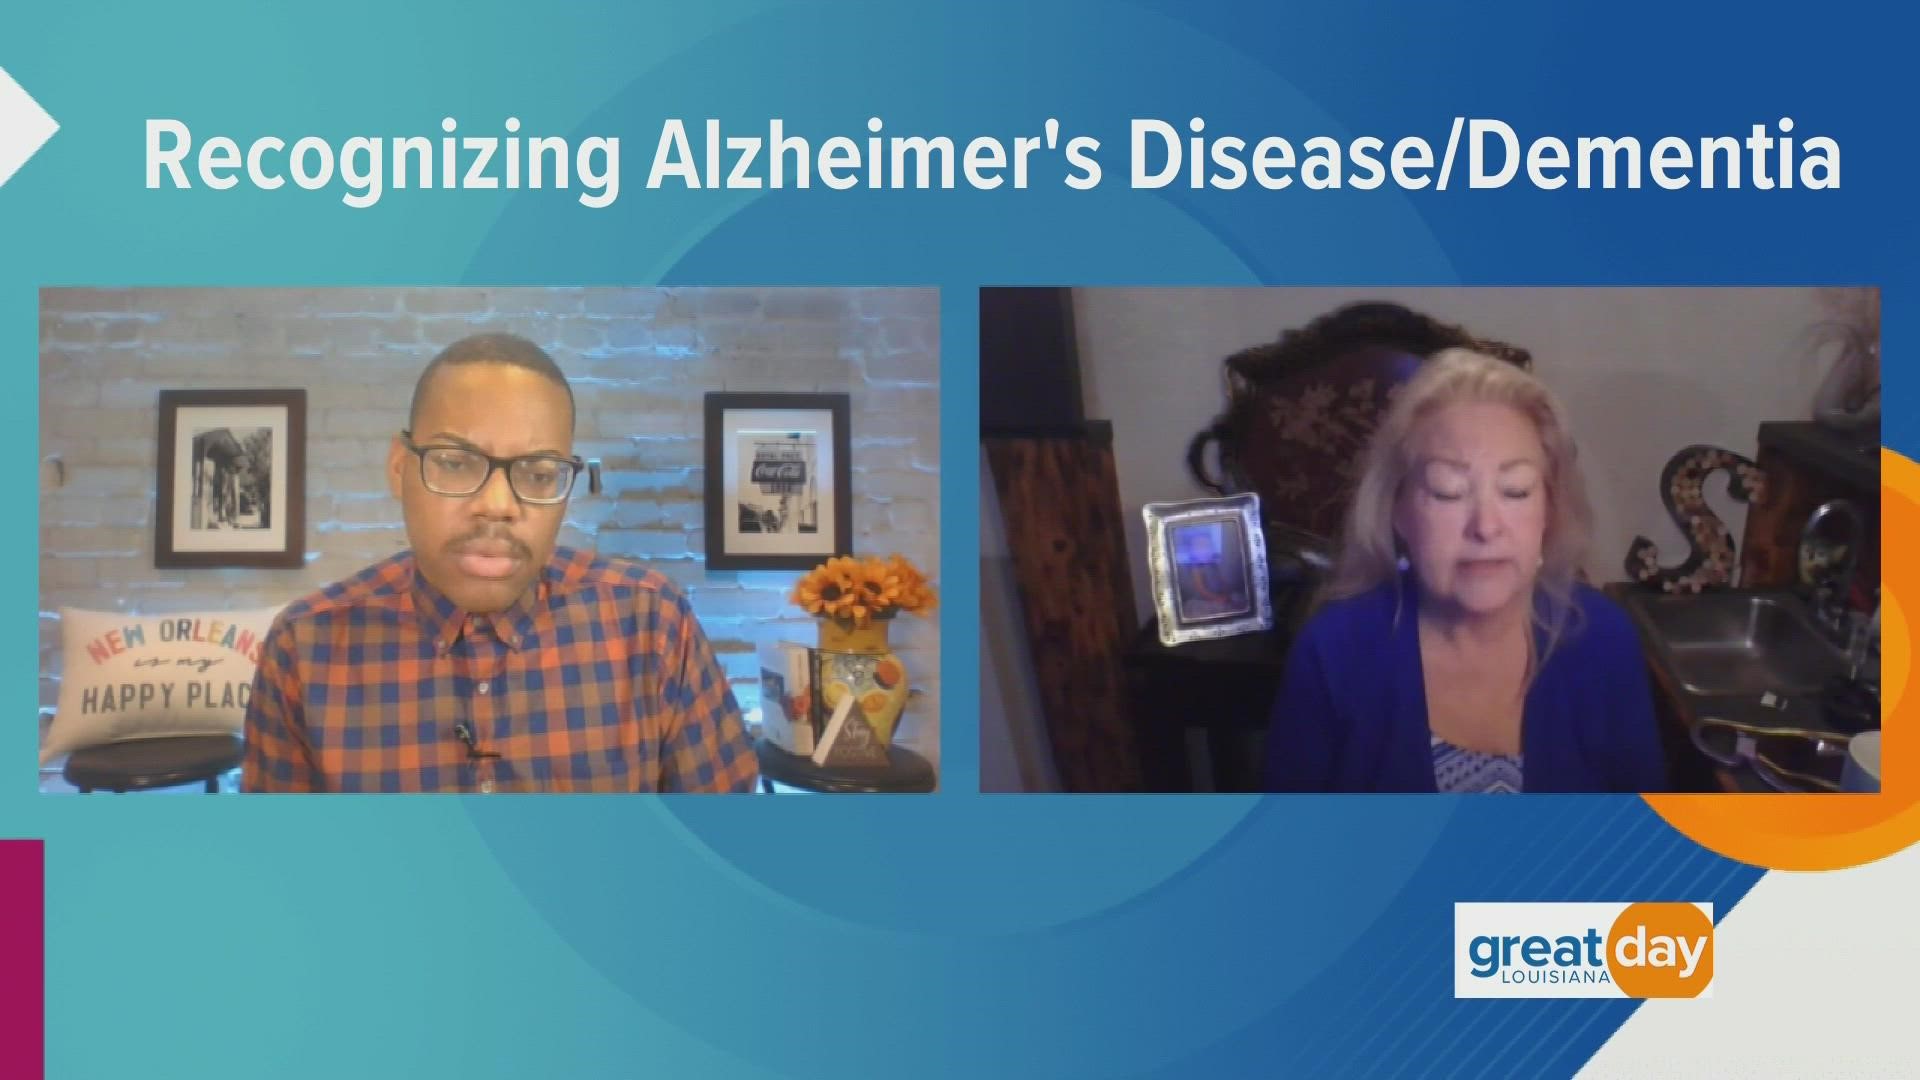 A behavioral expert discussed the signs and symptoms to look out for when diagnosing Alzheimer's disease or dementia.